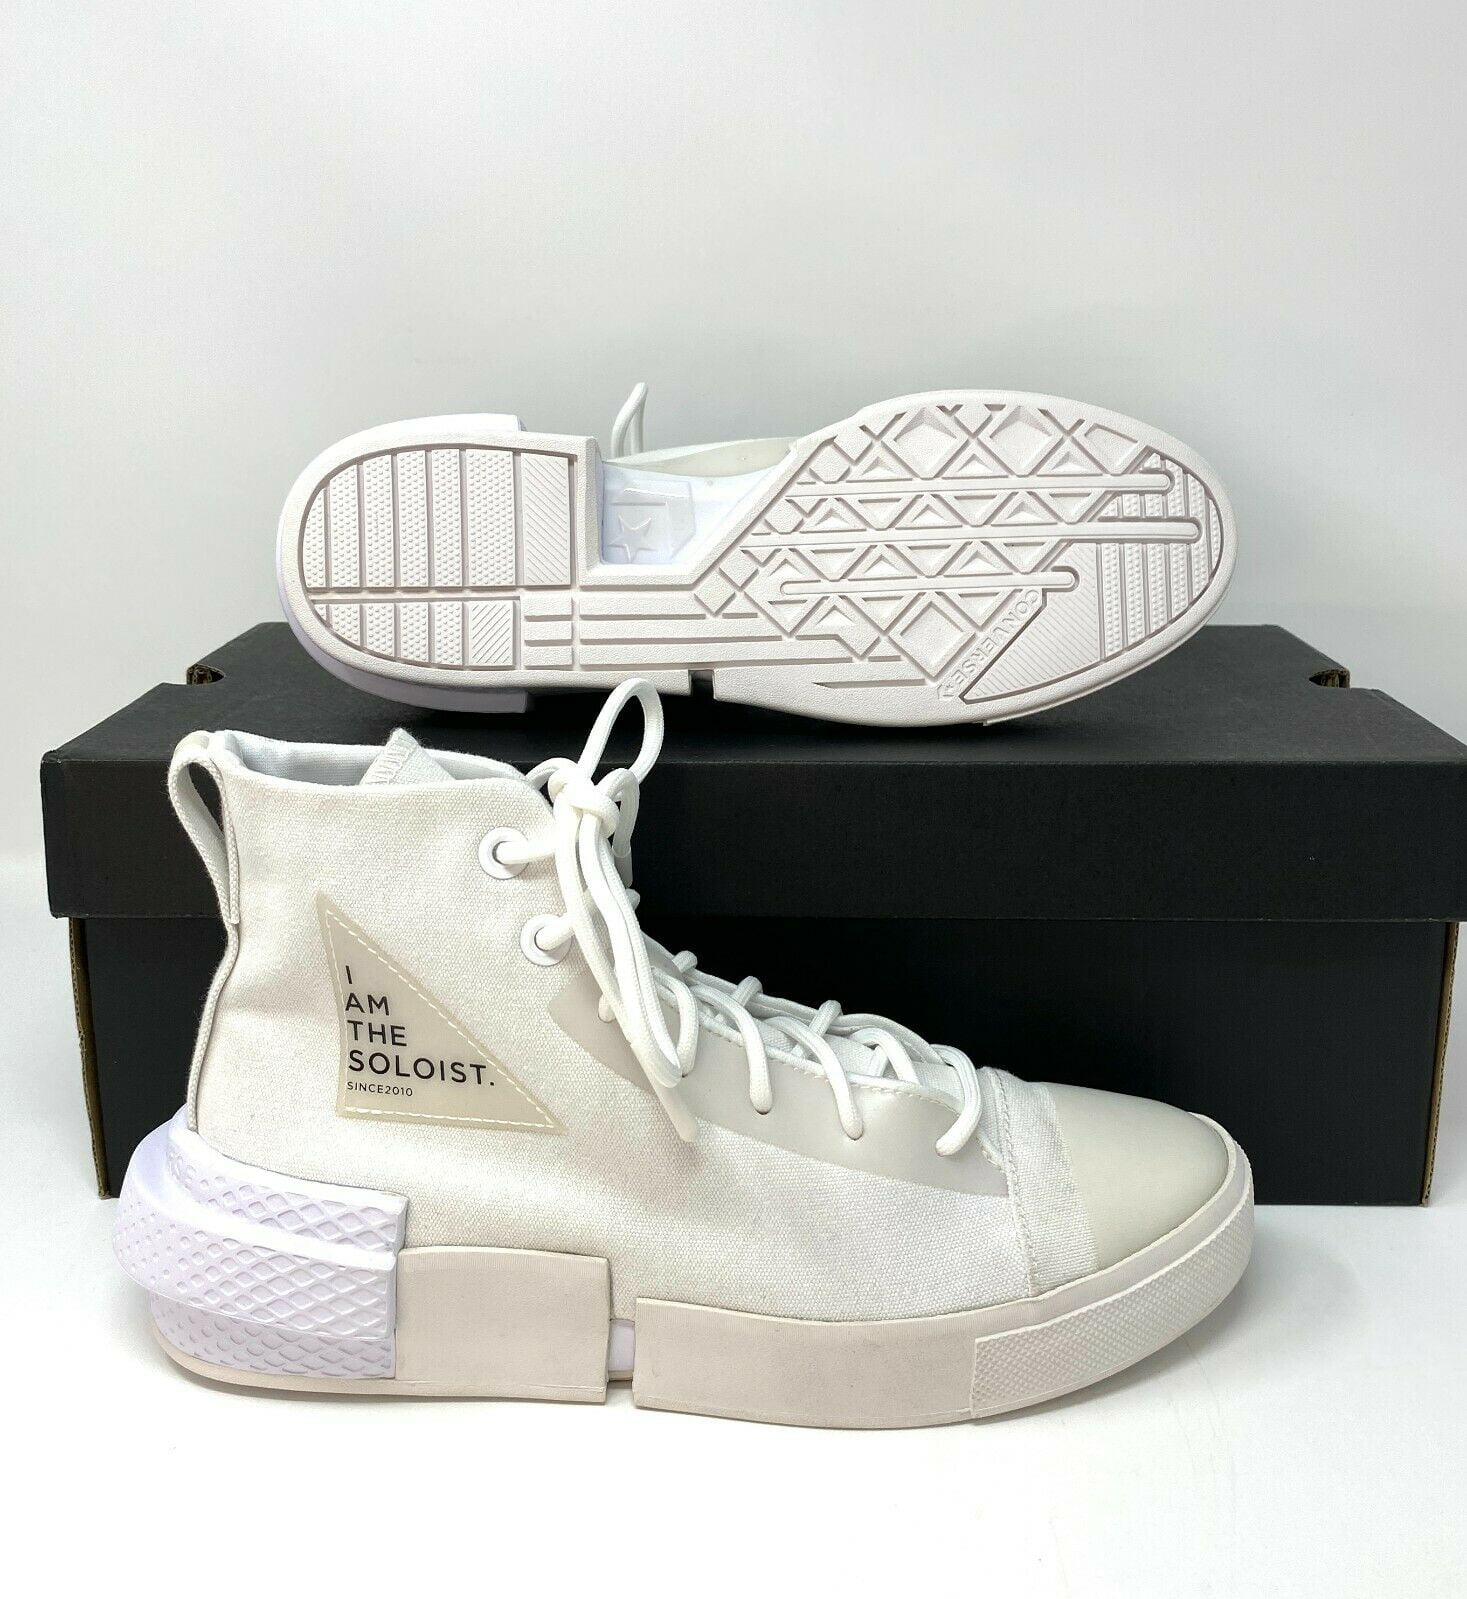 Converse ALL STAR DISRUPT CX High Top Canvas White Men's Sneakers 168214C